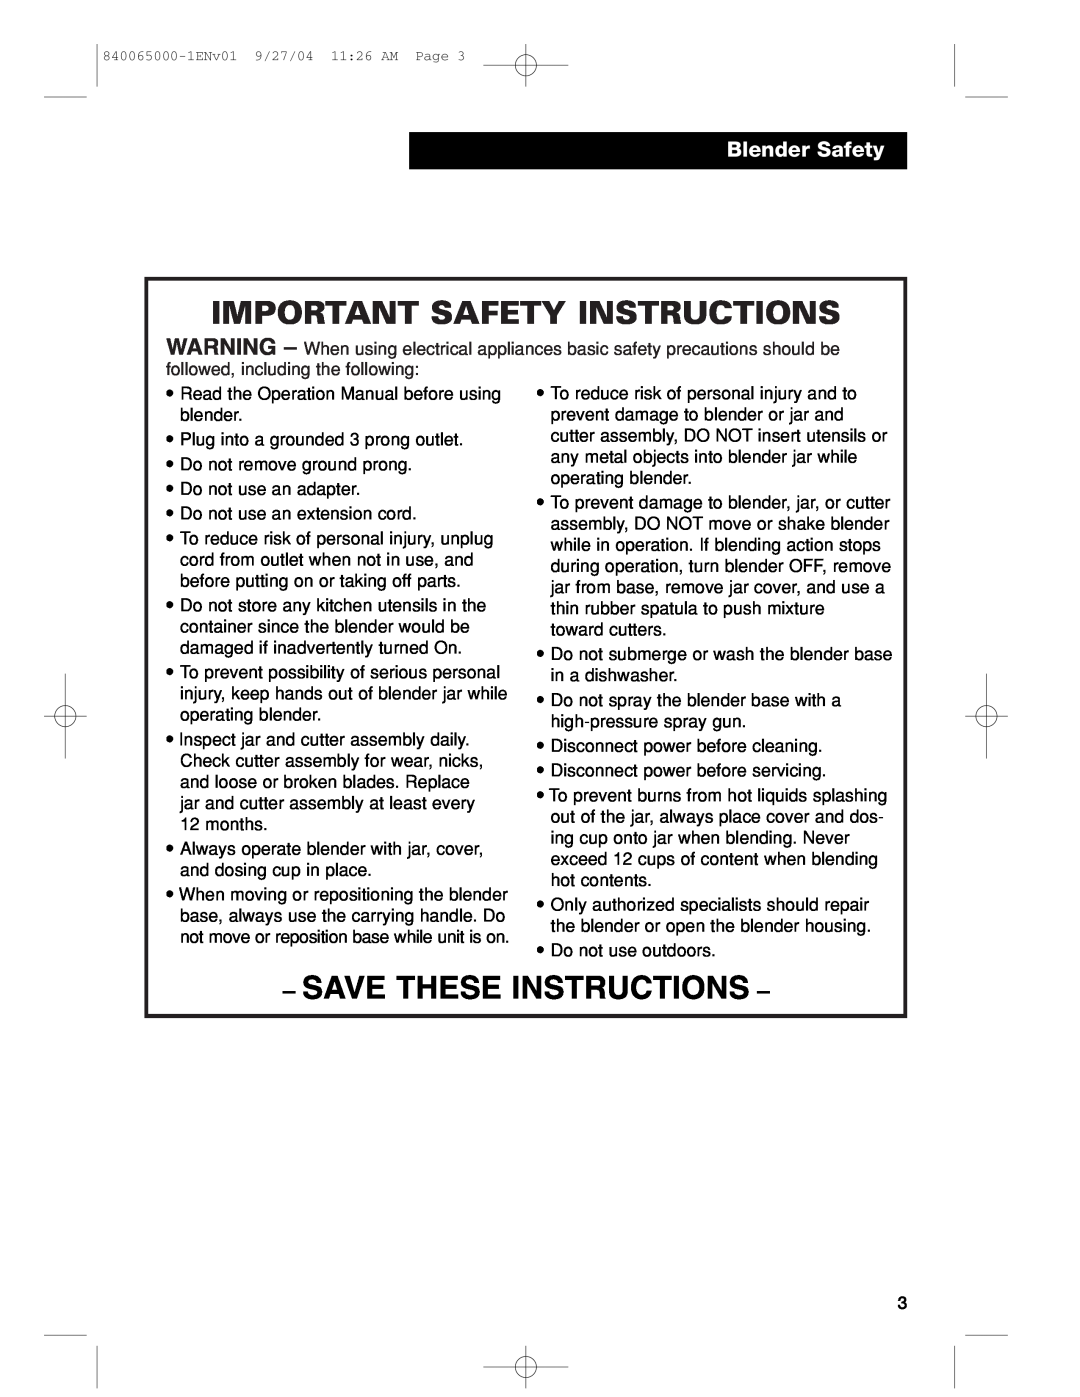 Proctor-Silex 994 operation manual Important Safety Instructions, Save These Instructions, Blender Safety 